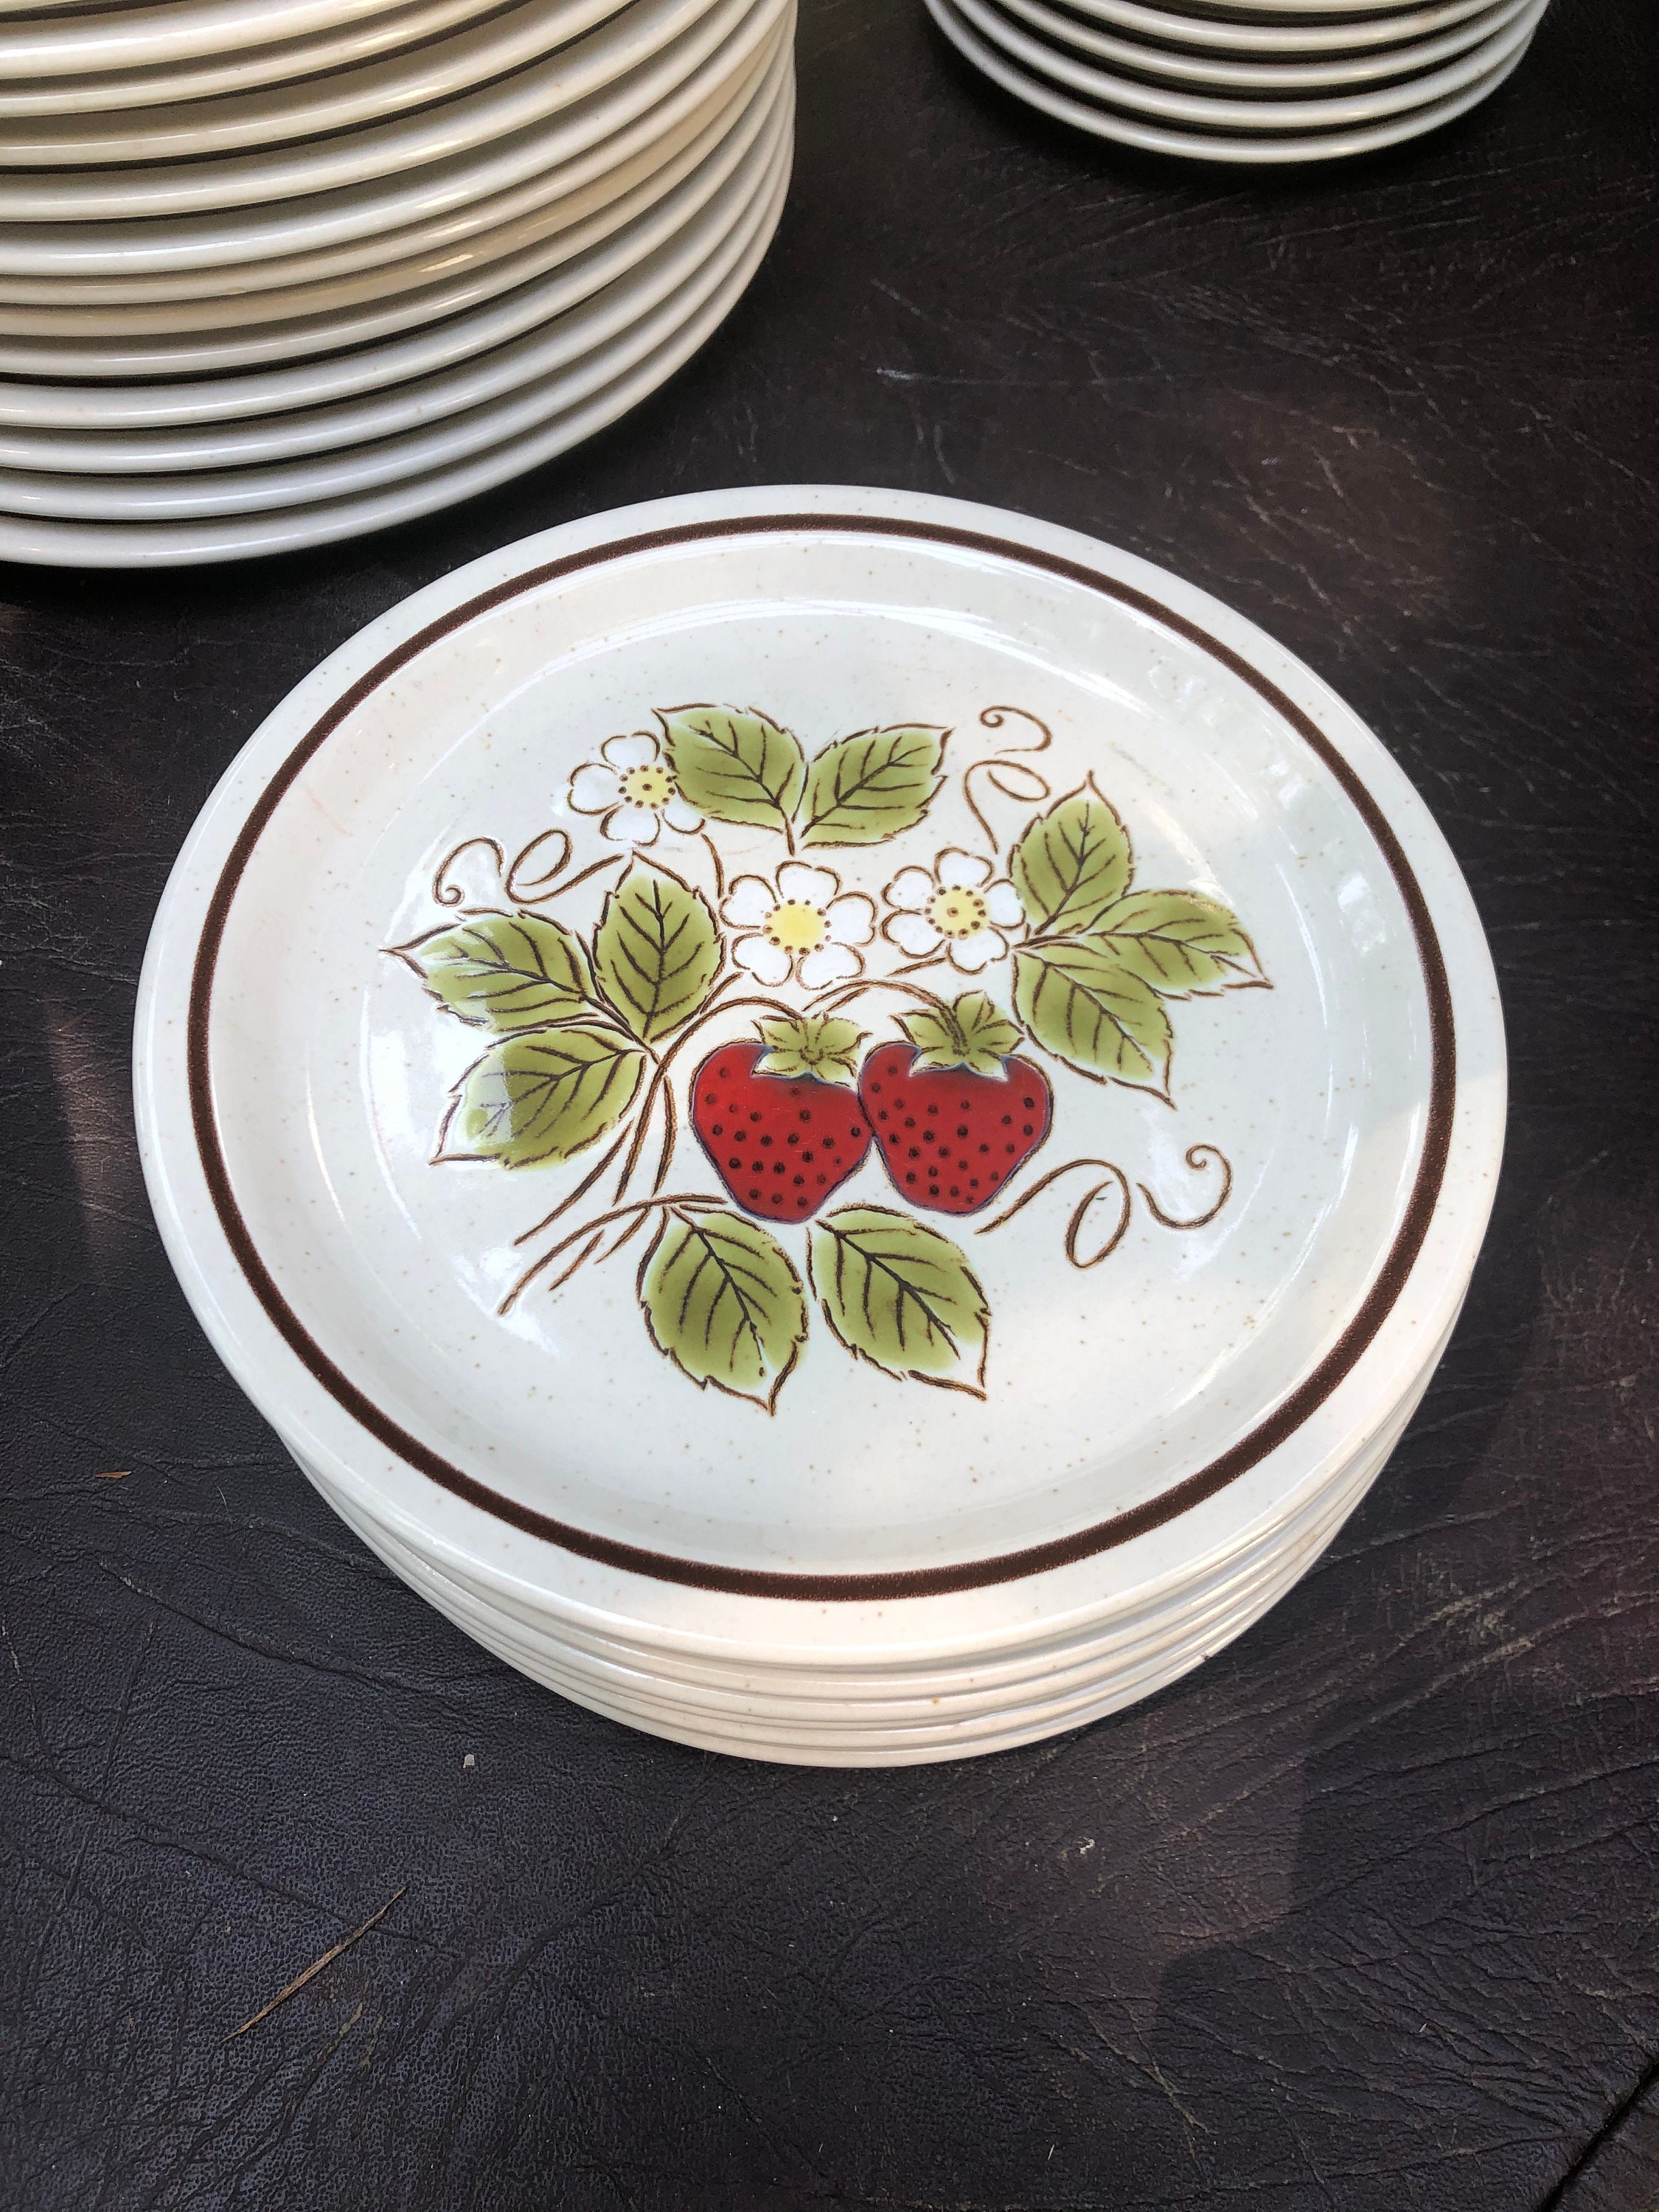 Strawberry Plate Project Kit – Color Me Mine Woodbury